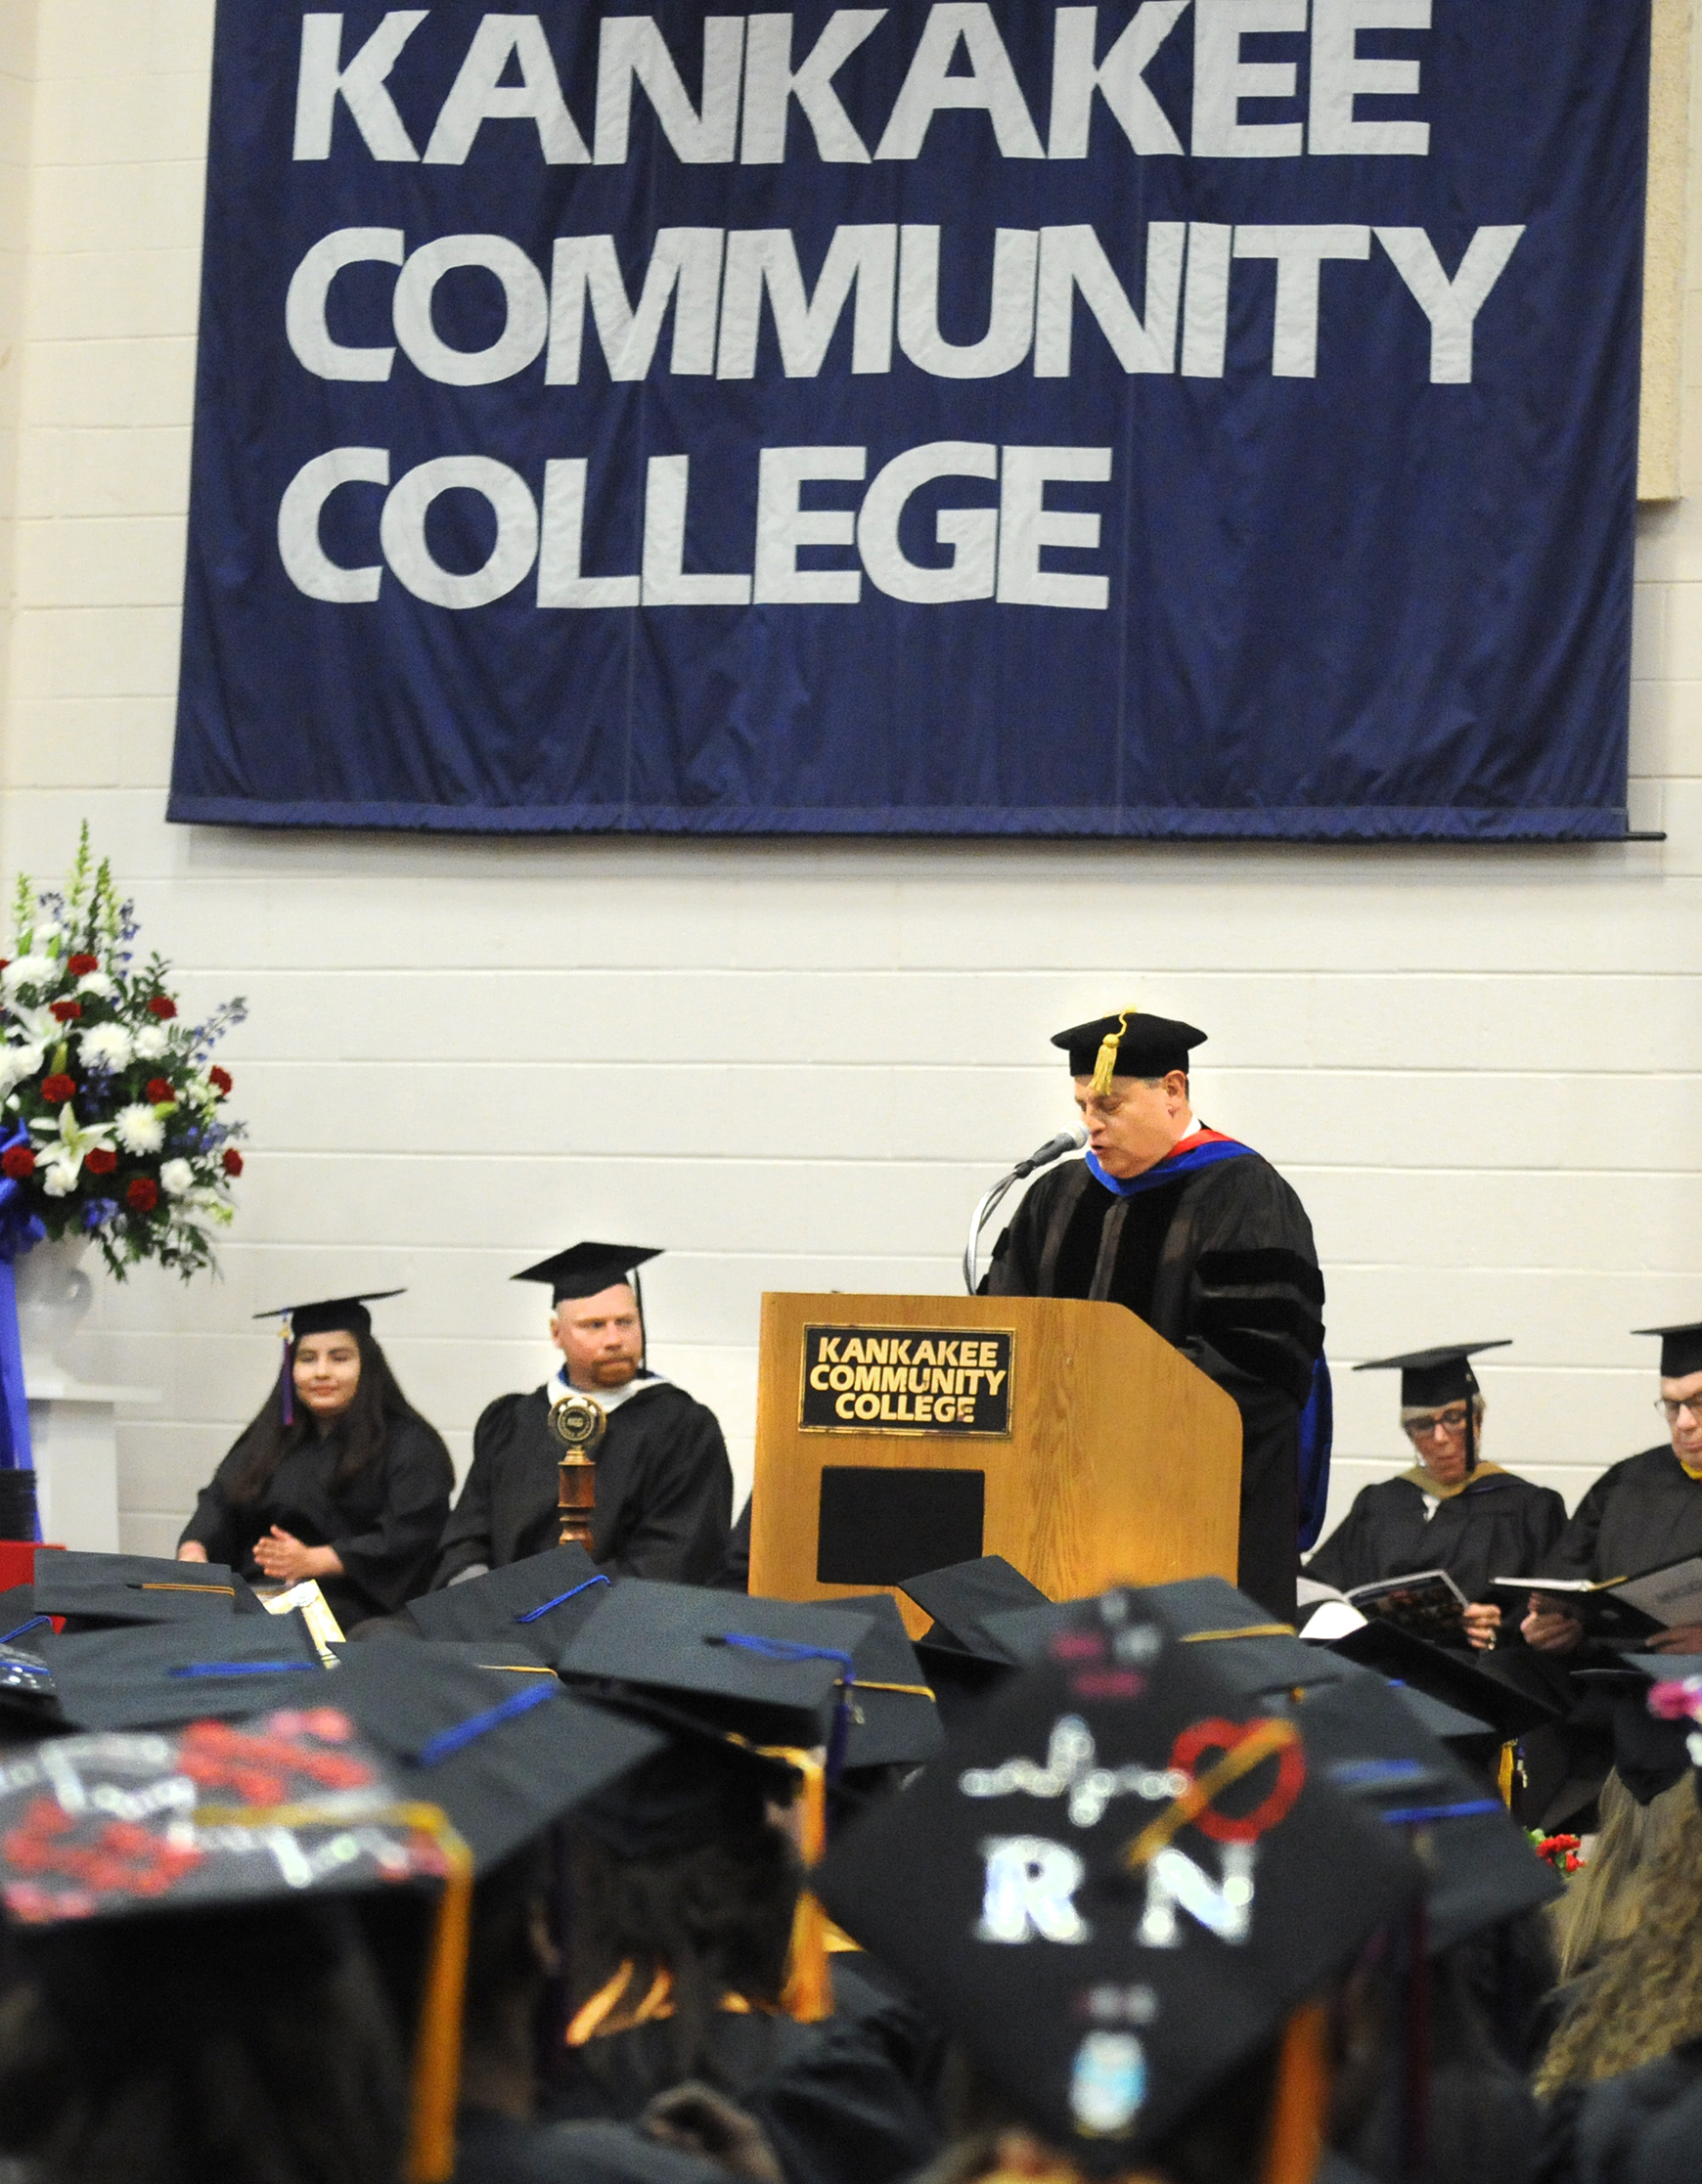  Kankakee Community College President, Dr. John Avendano, gives his welcoming speech during the commencement ceremony Saturday at Kankakee Community College. 